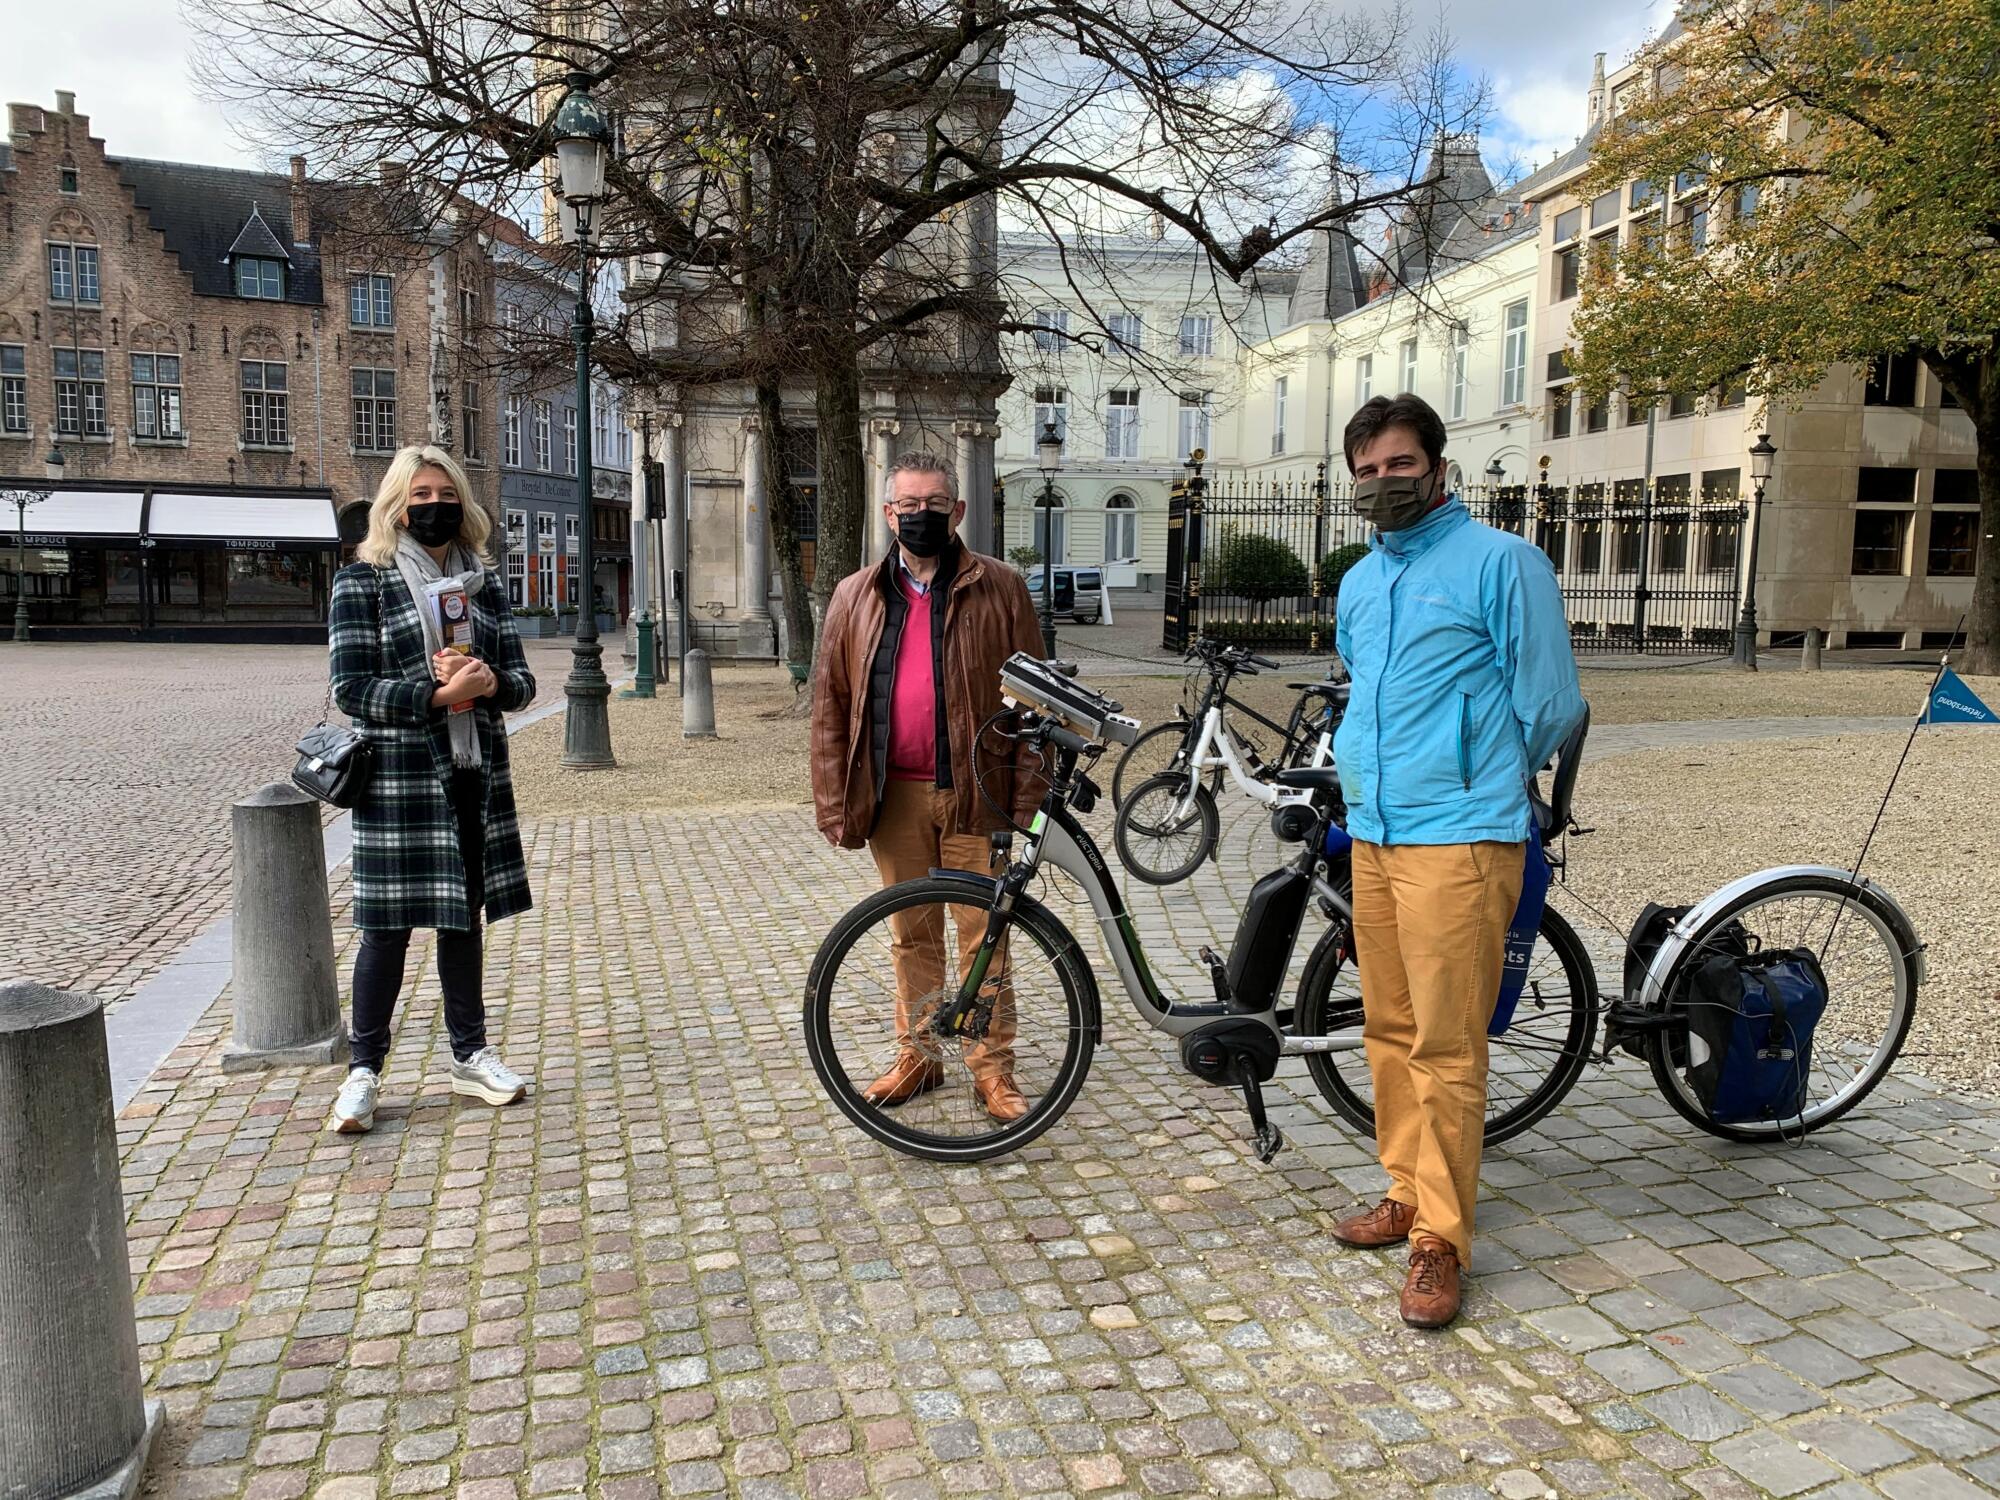 Bruges evaluates cycle paths with a “measuring bike”